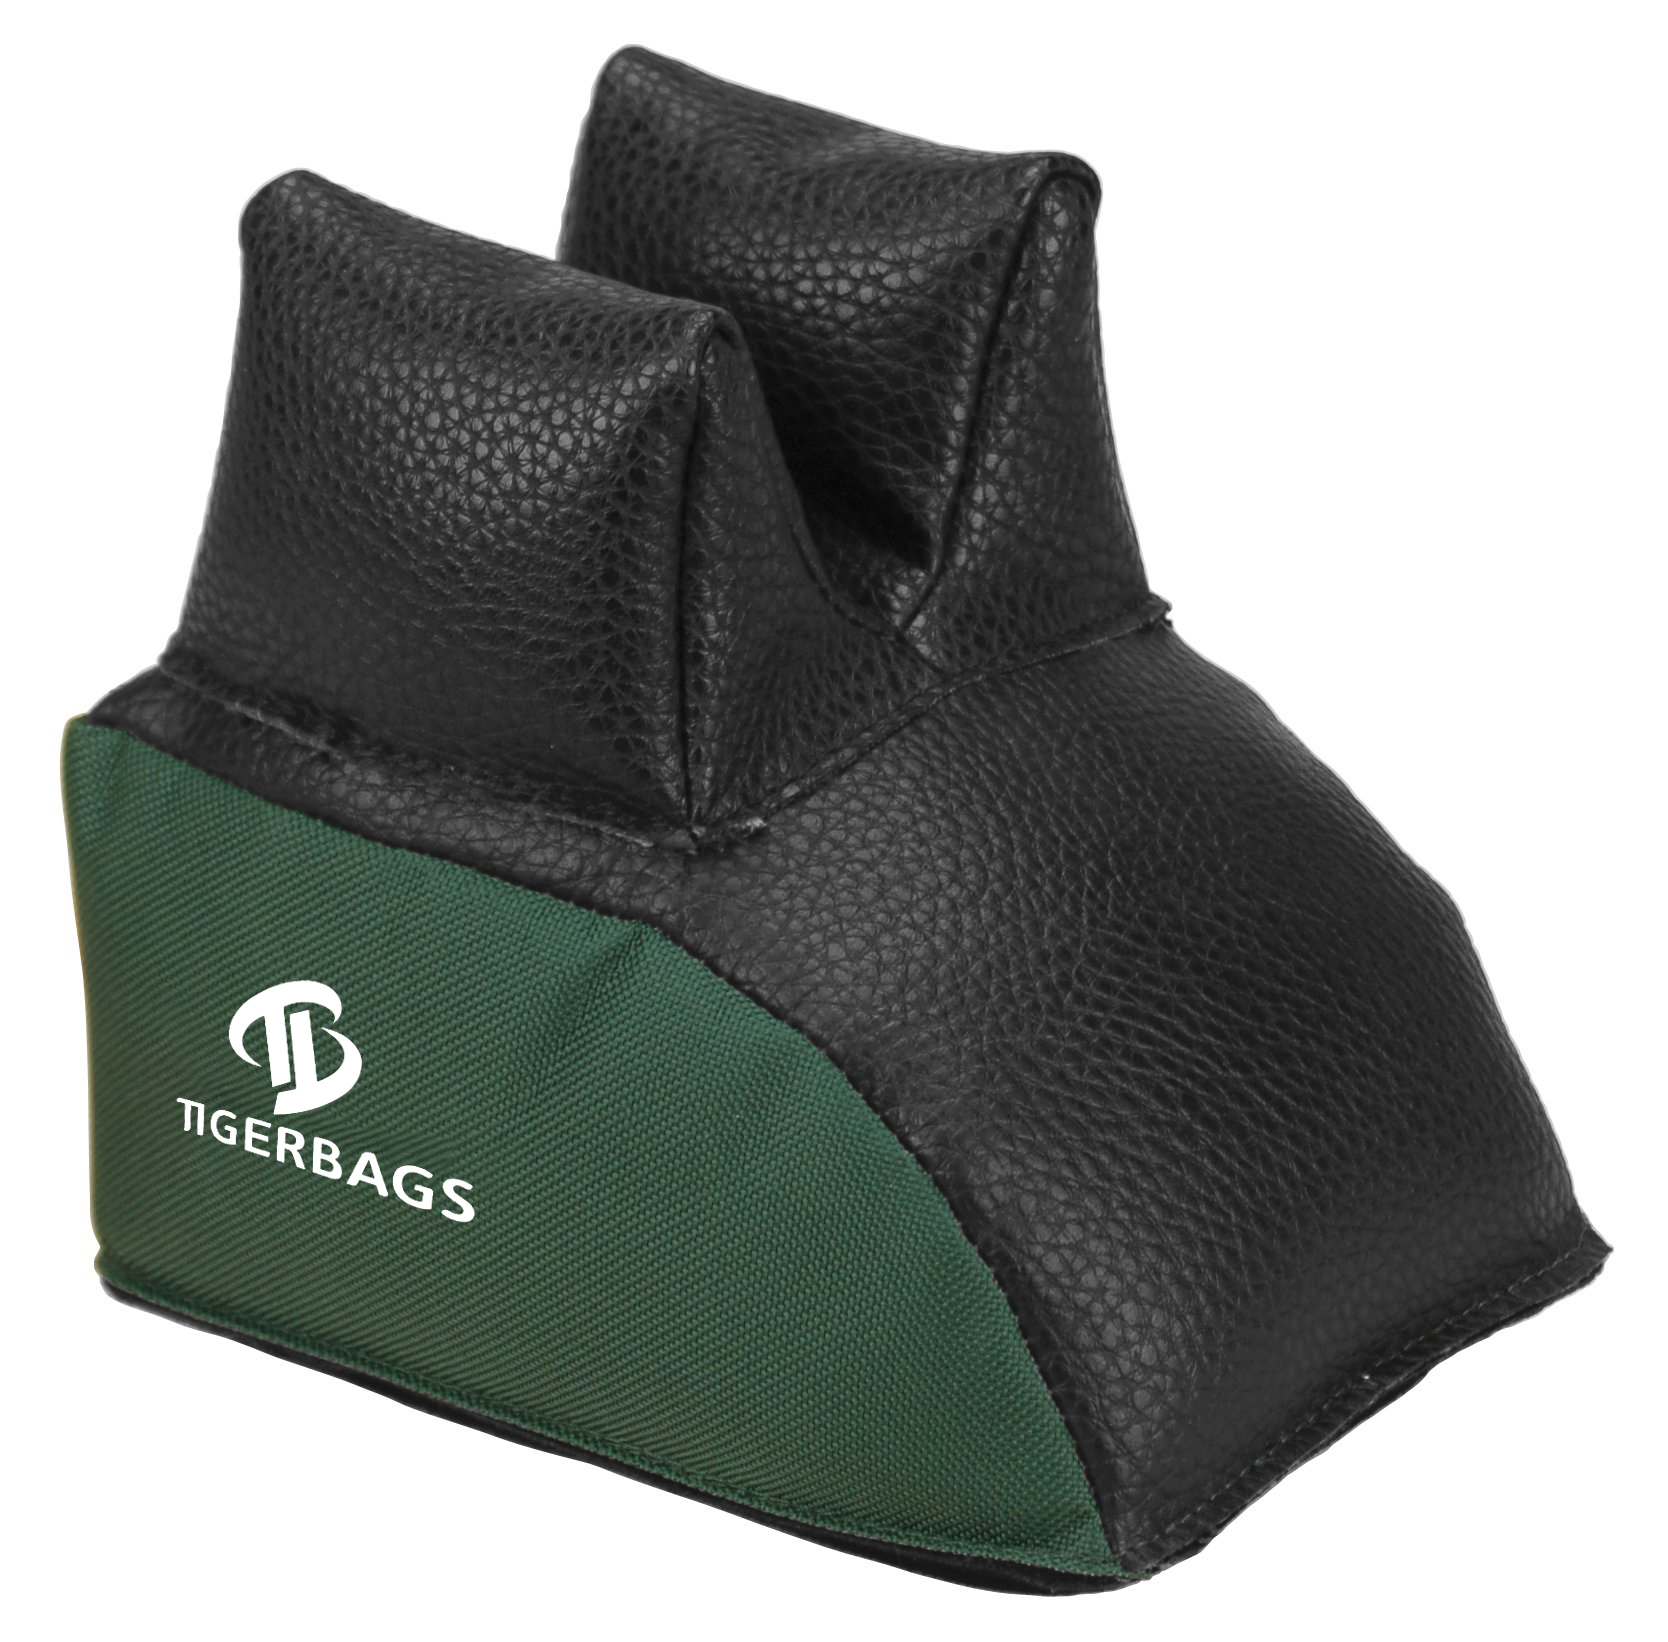 Universal Rear Shooting Bag features durable construction and hook-and-loop straps